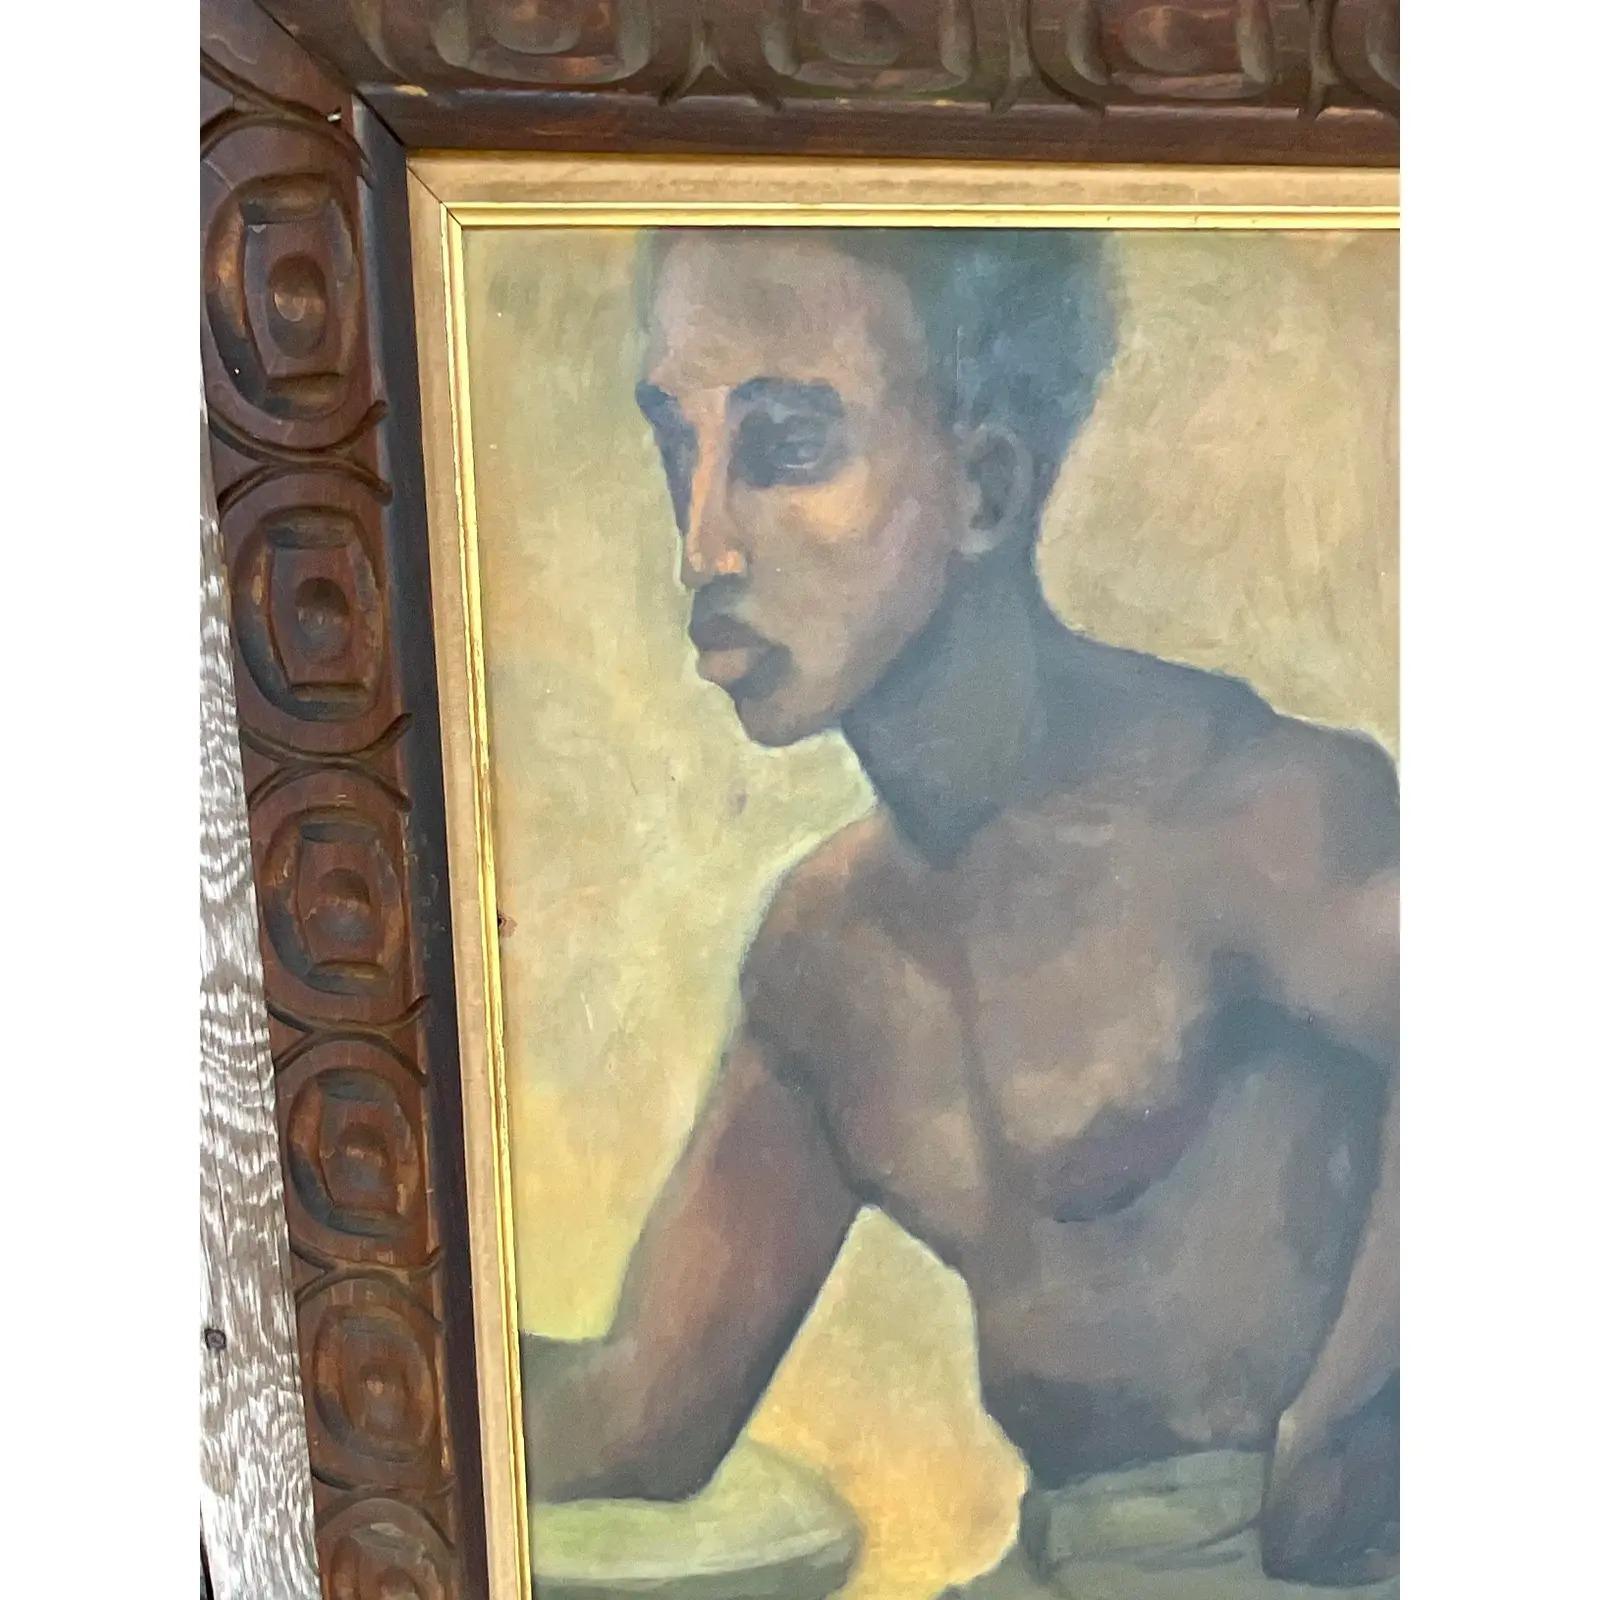 Fantastic original oil painting of a man. Rich and moody tones dominate the composition. Signed by the artist, but I can’t make out the signature. Beautiful hand carved frame.